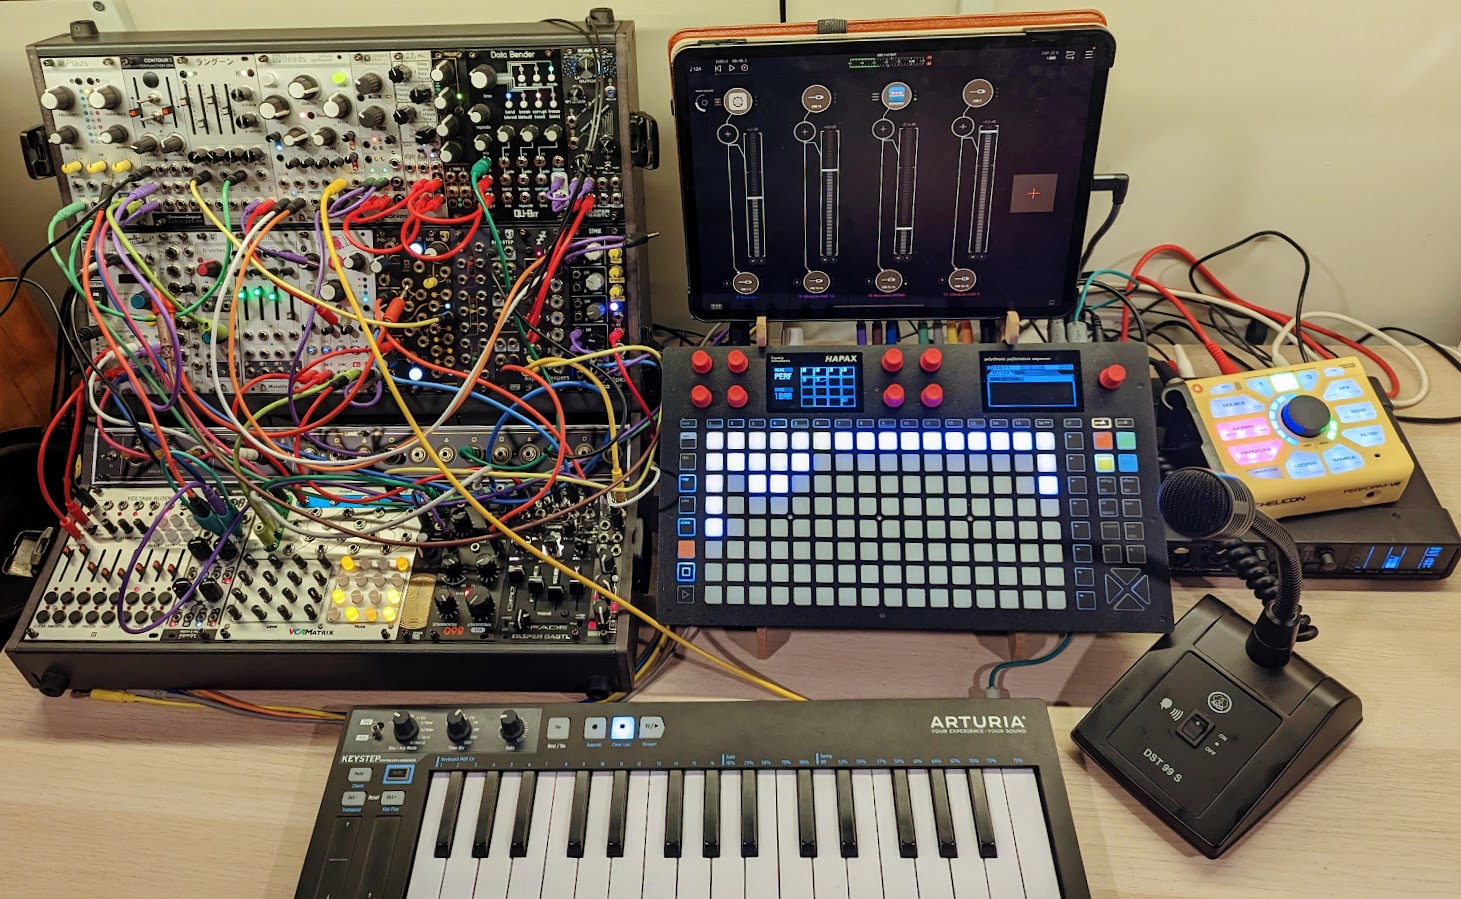 A modular synth set up on a desk with multicoloured cables, a microphone and a keyboard